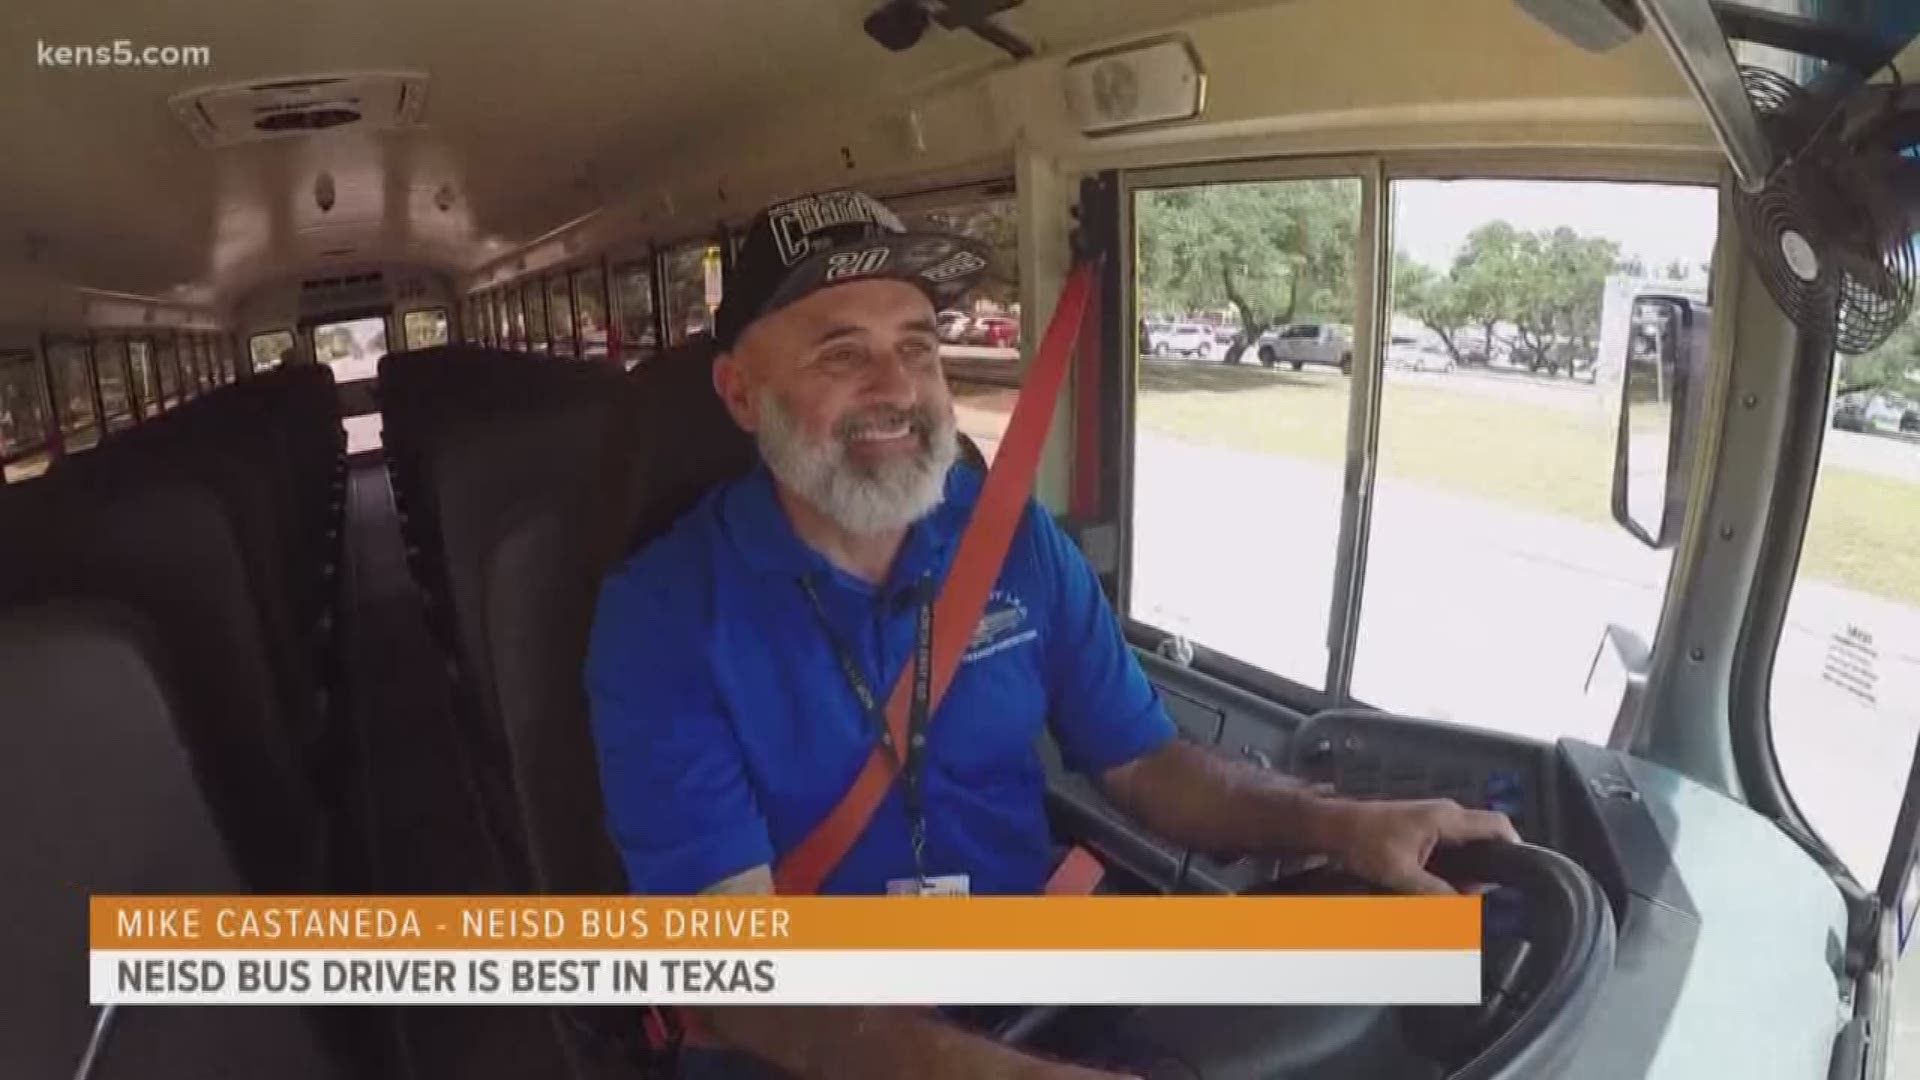 This bus driver placed third in a national competition, and now he is sharing advice with other drivers.